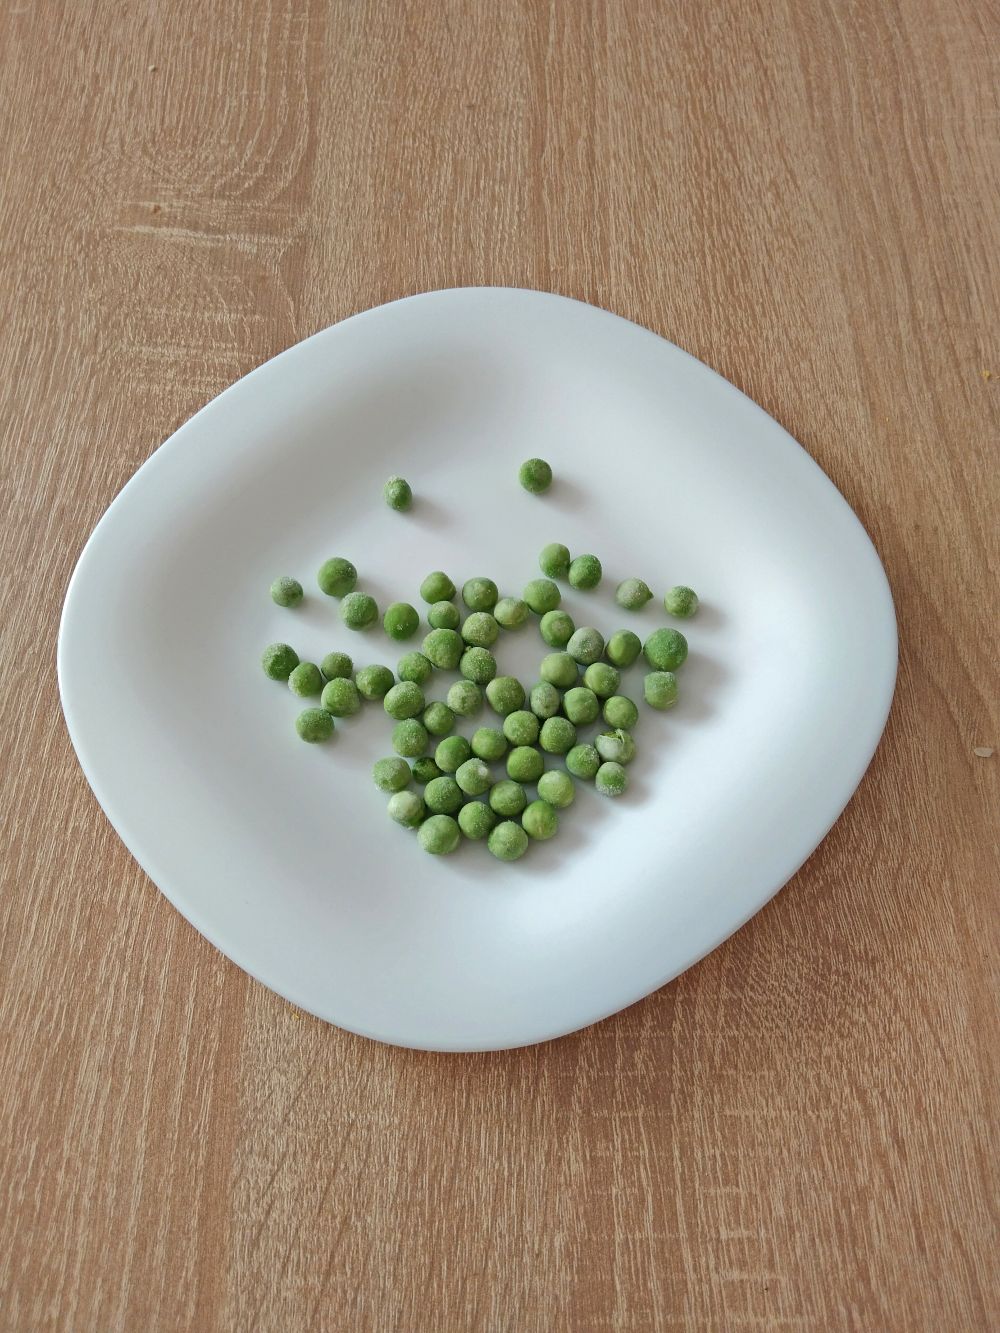 Green peas on a white plate on the table